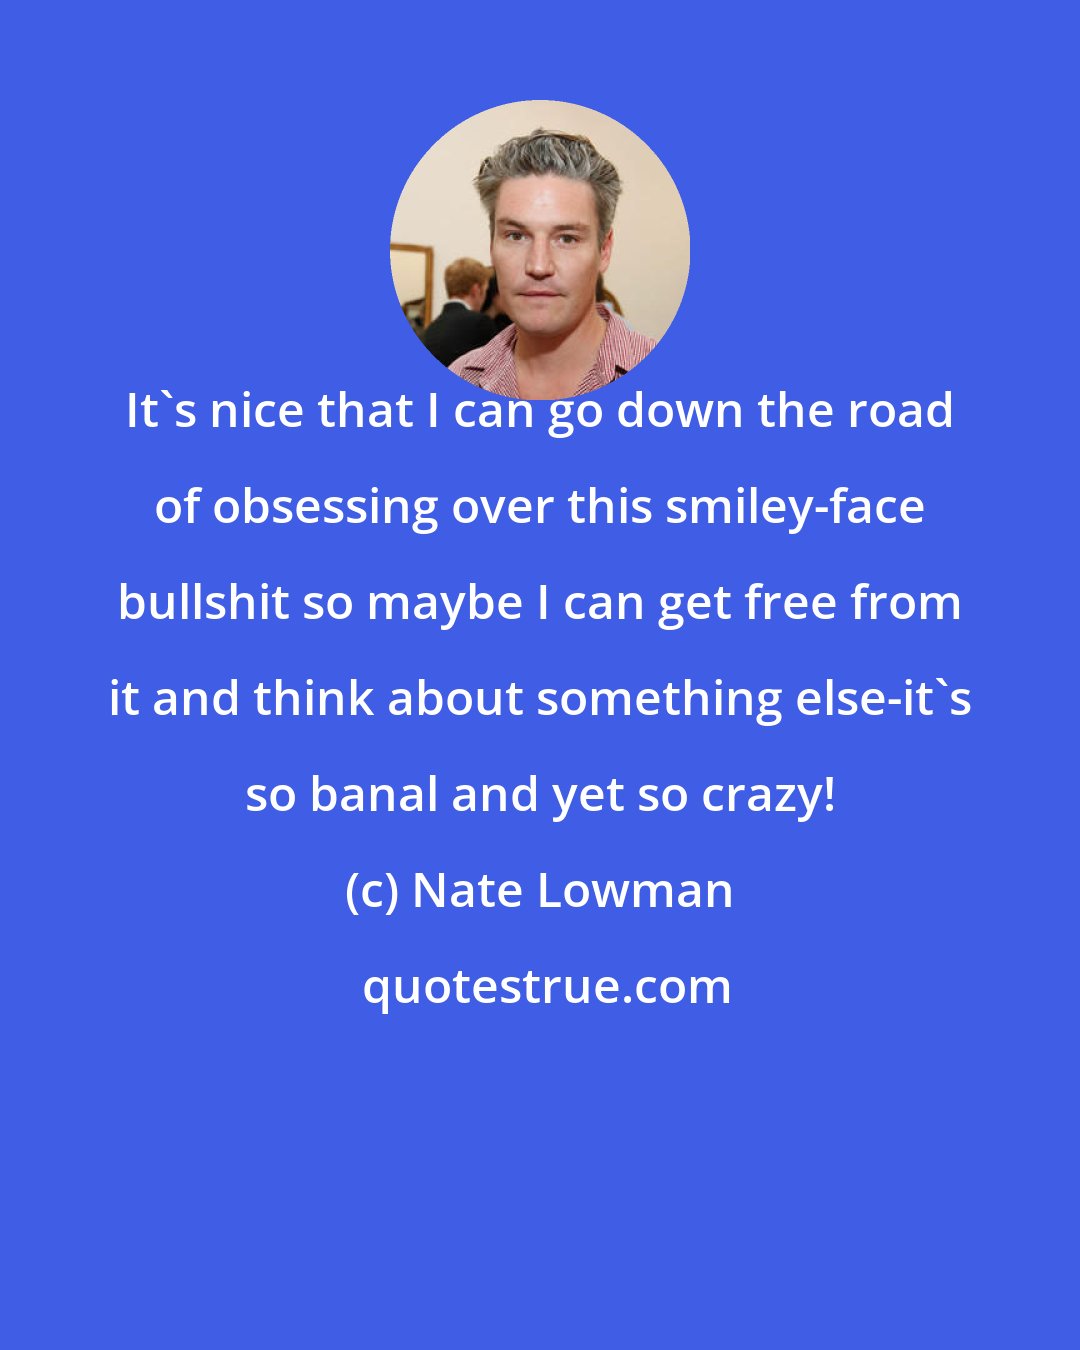 Nate Lowman: It's nice that I can go down the road of obsessing over this smiley-face bullshit so maybe I can get free from it and think about something else-it's so banal and yet so crazy!